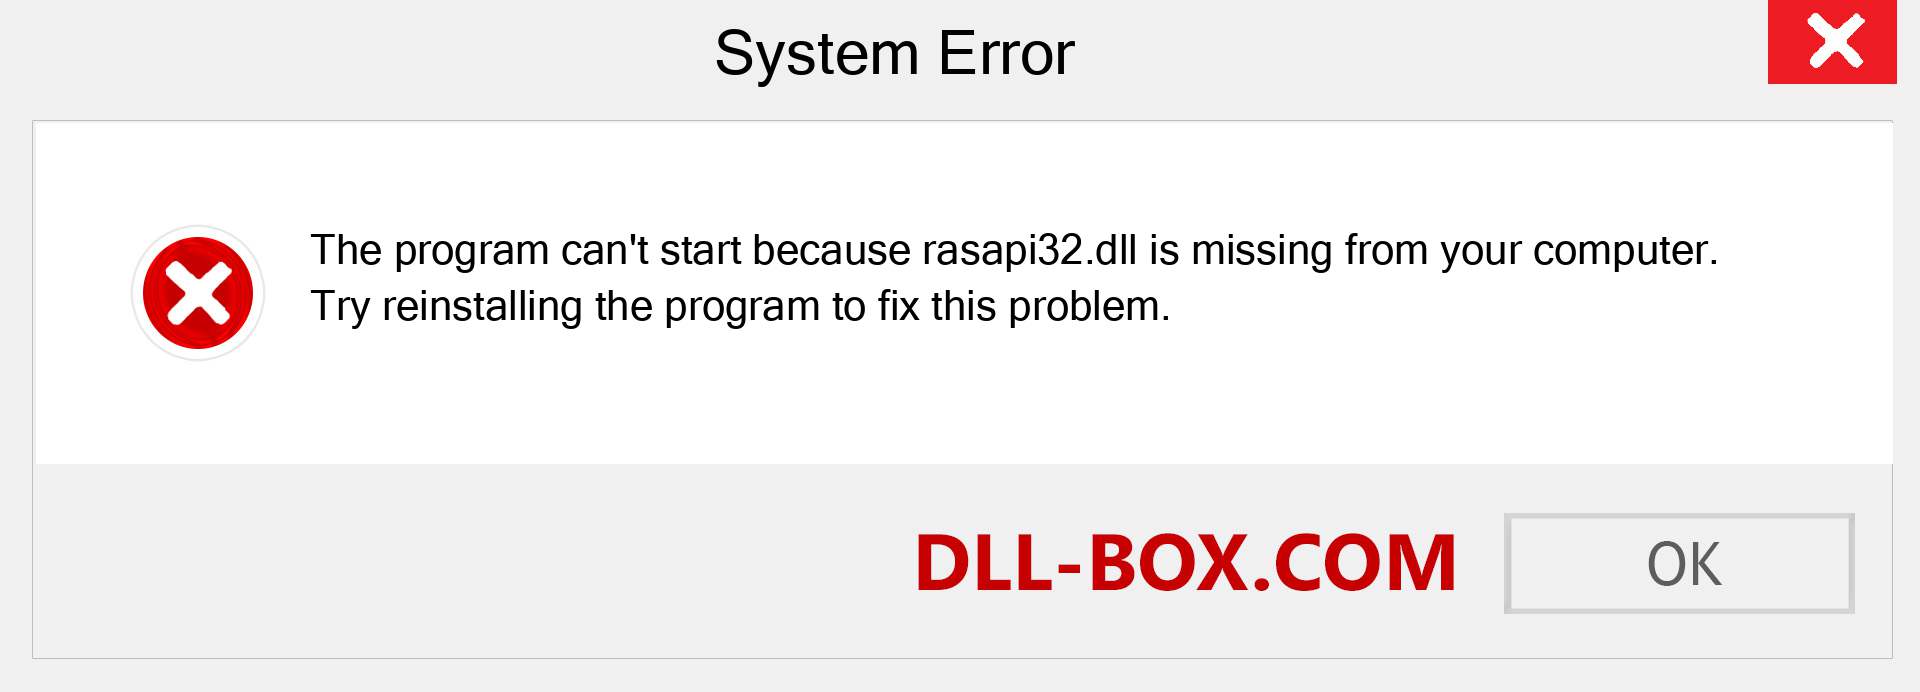  rasapi32.dll file is missing?. Download for Windows 7, 8, 10 - Fix  rasapi32 dll Missing Error on Windows, photos, images